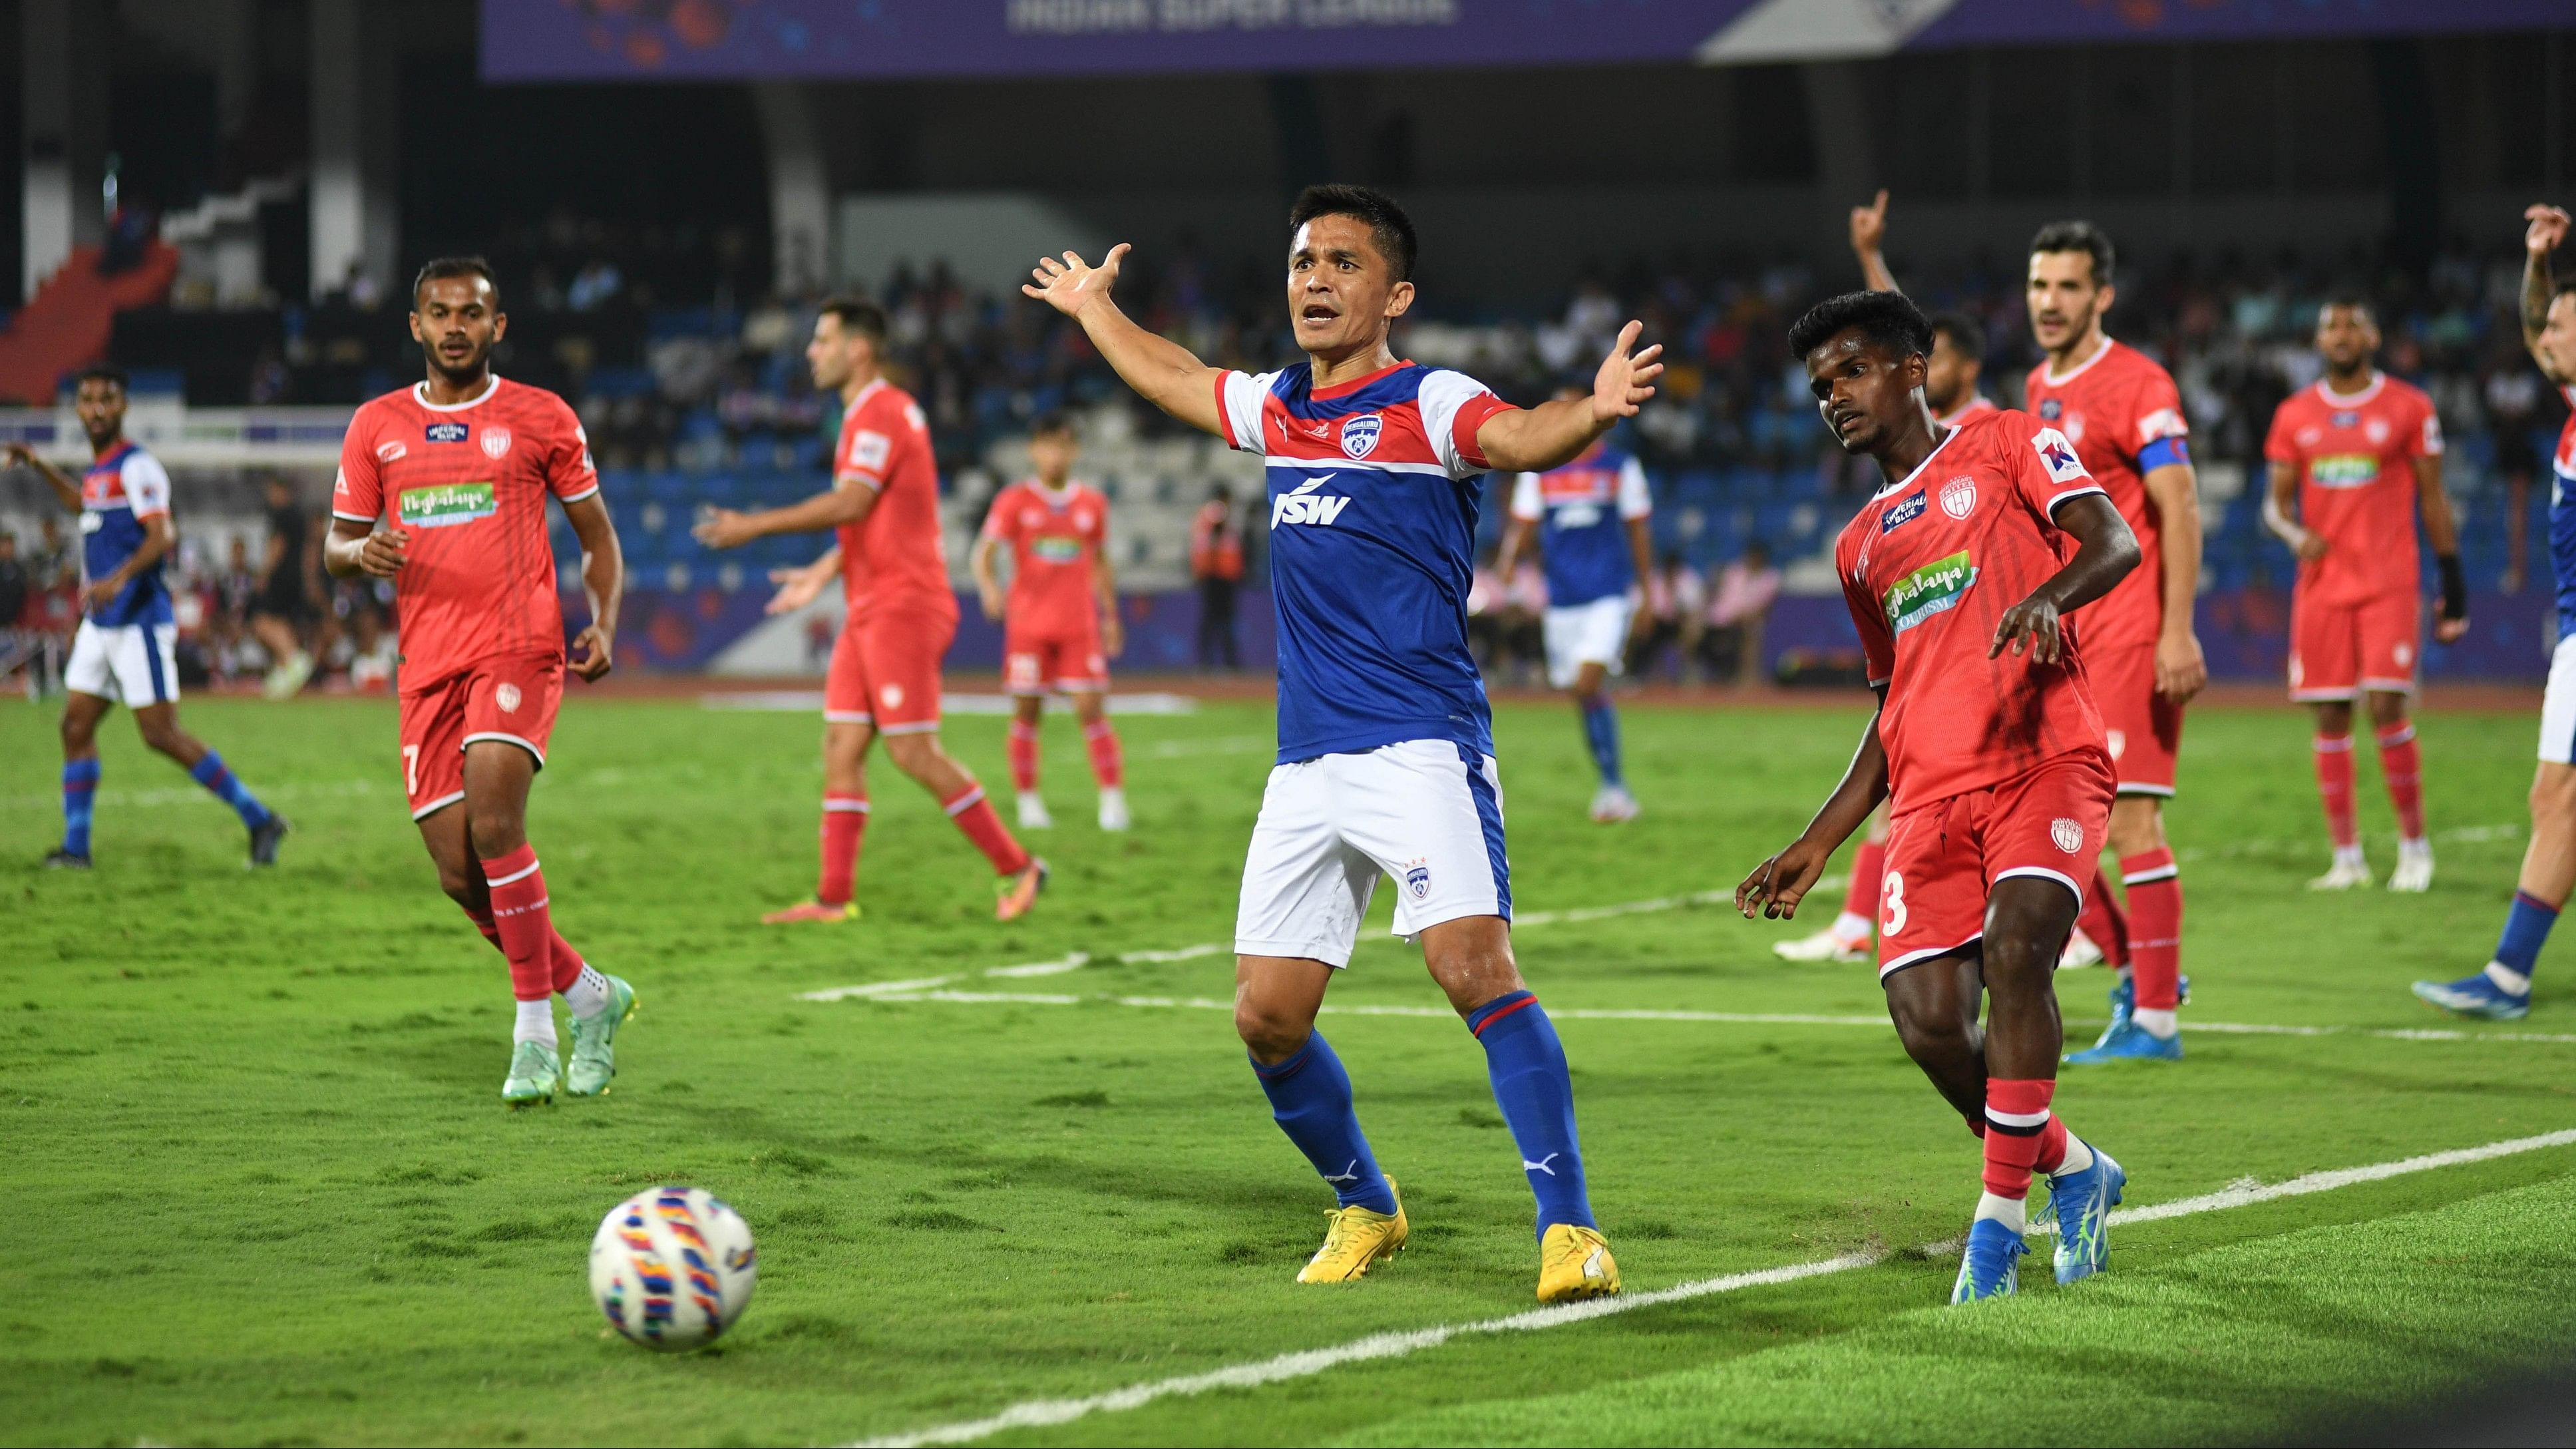 <div class="paragraphs"><p>The fact that Bengaluru FC still relies on the 39-year-old Sunil Chhetri to score goals shows how bad the club is in the strike-force department.&nbsp;</p></div>